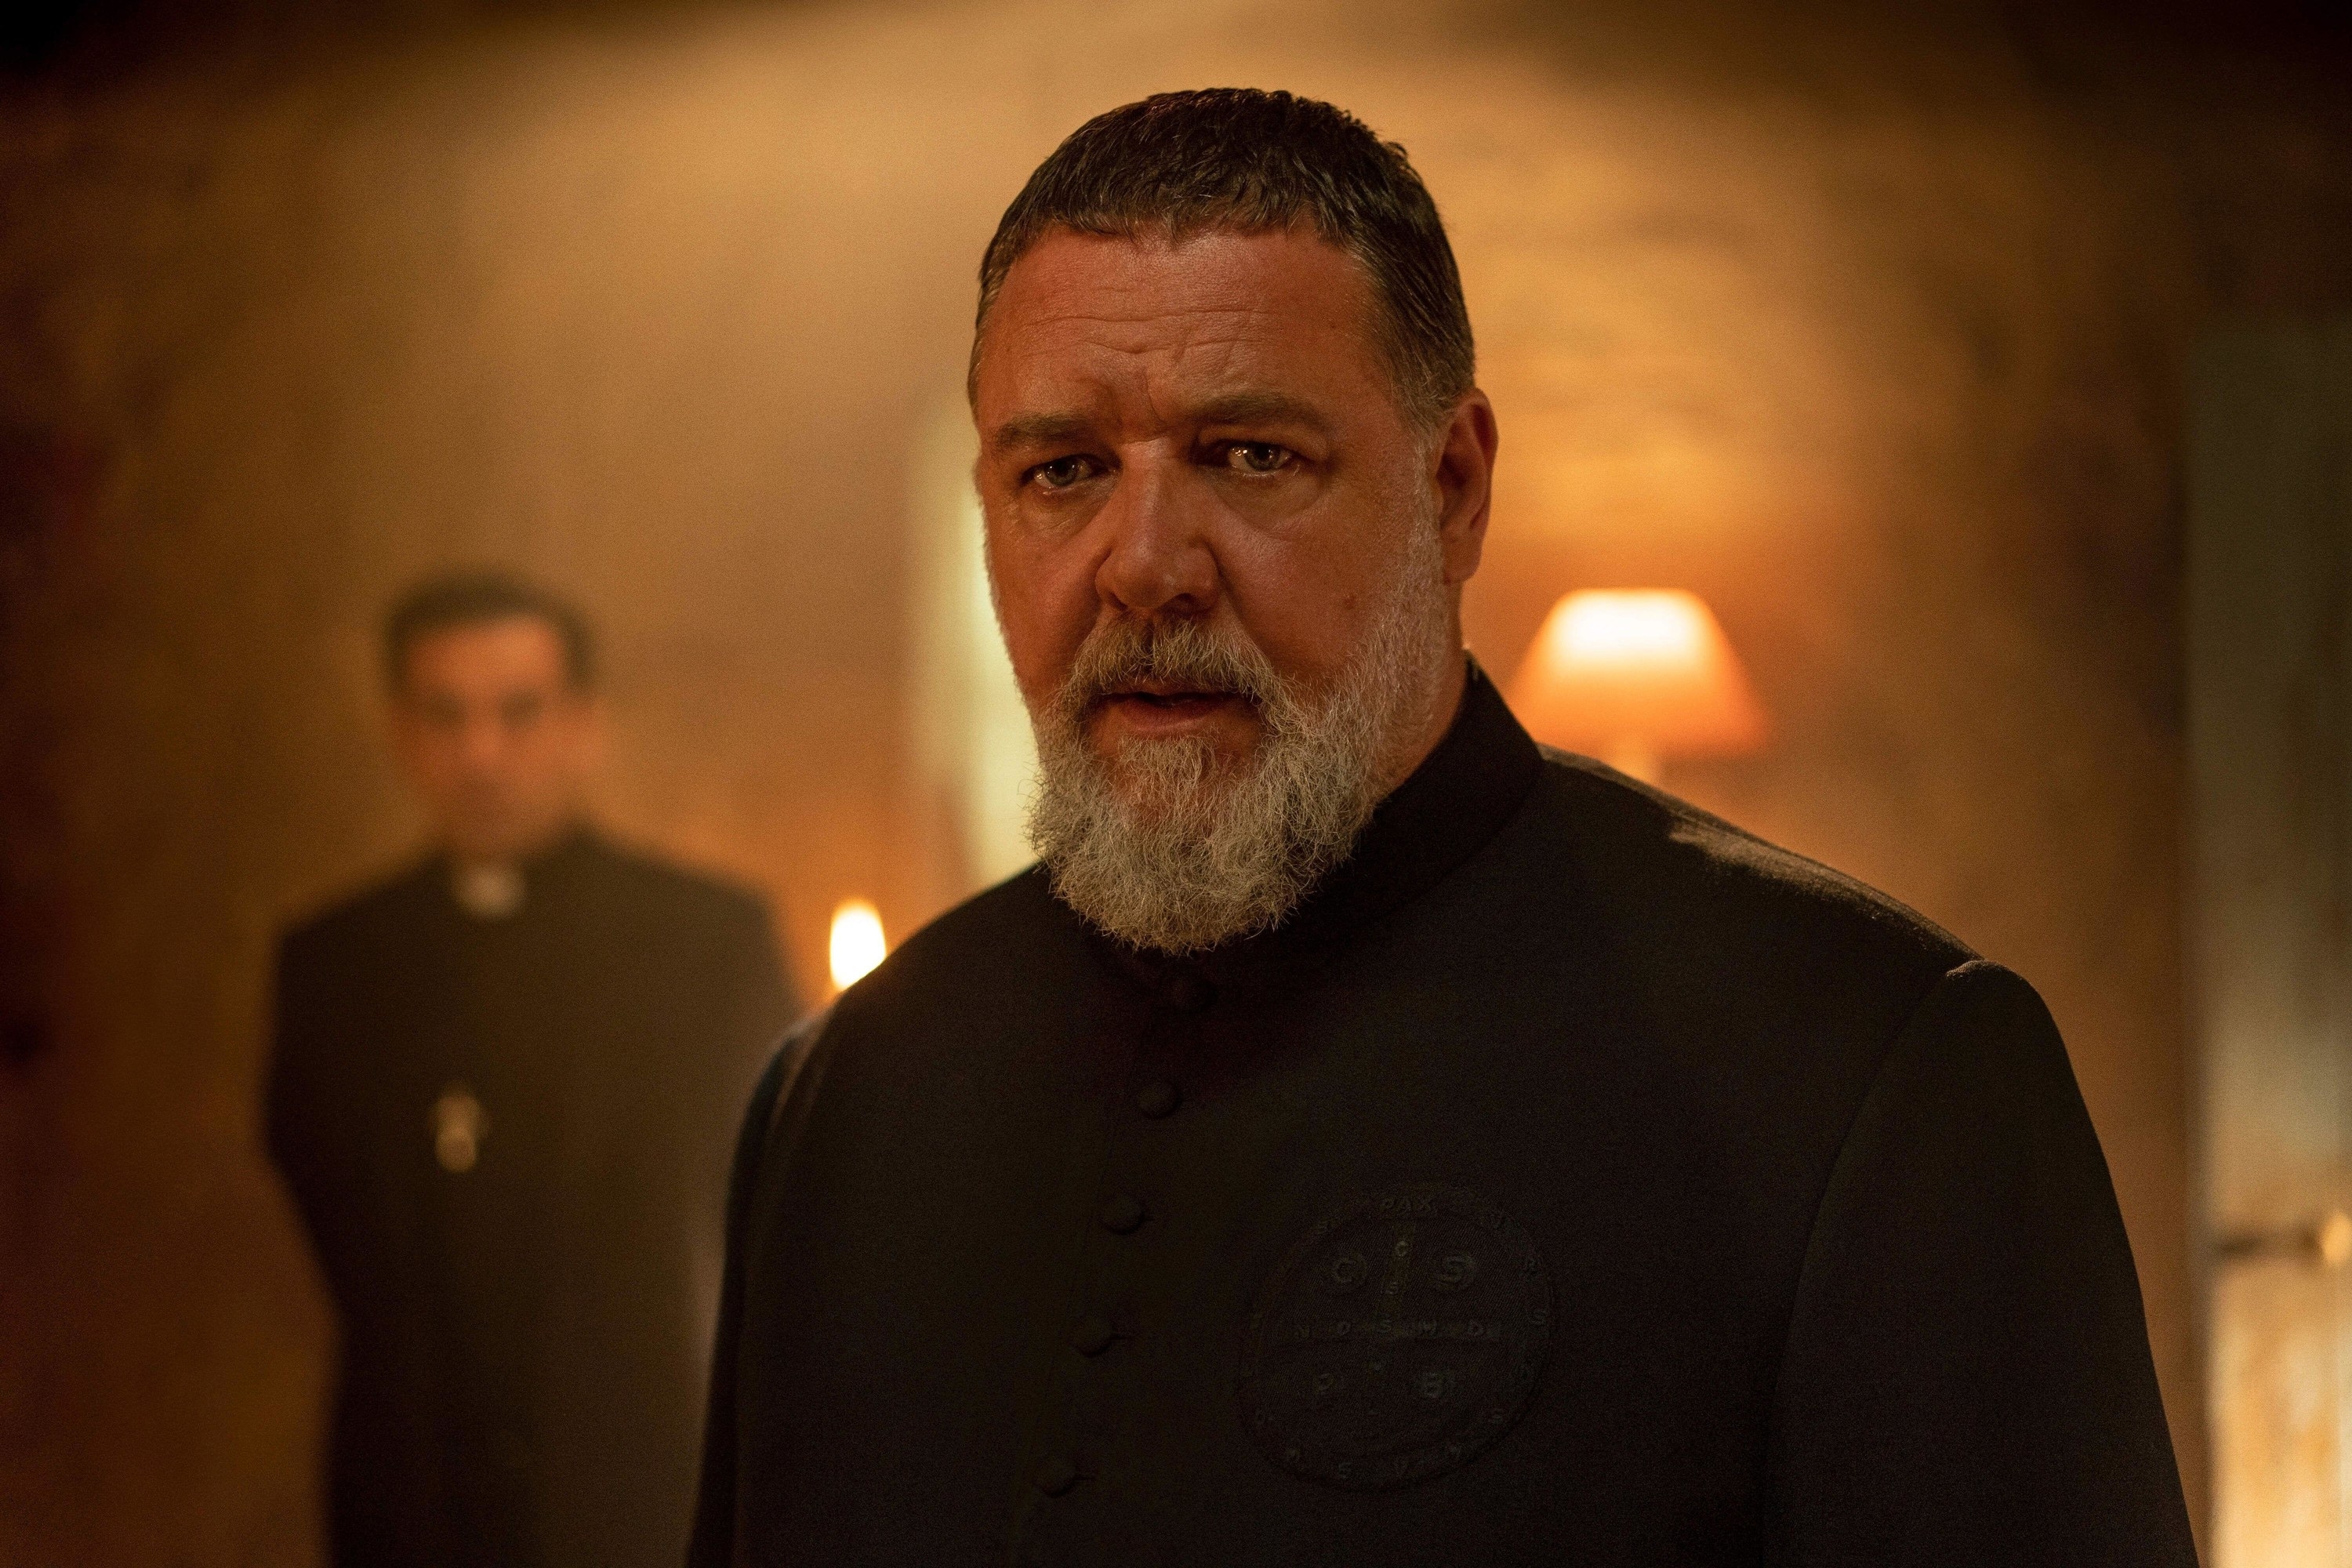 Russell Crowe stares intensely as a demon-battling priest